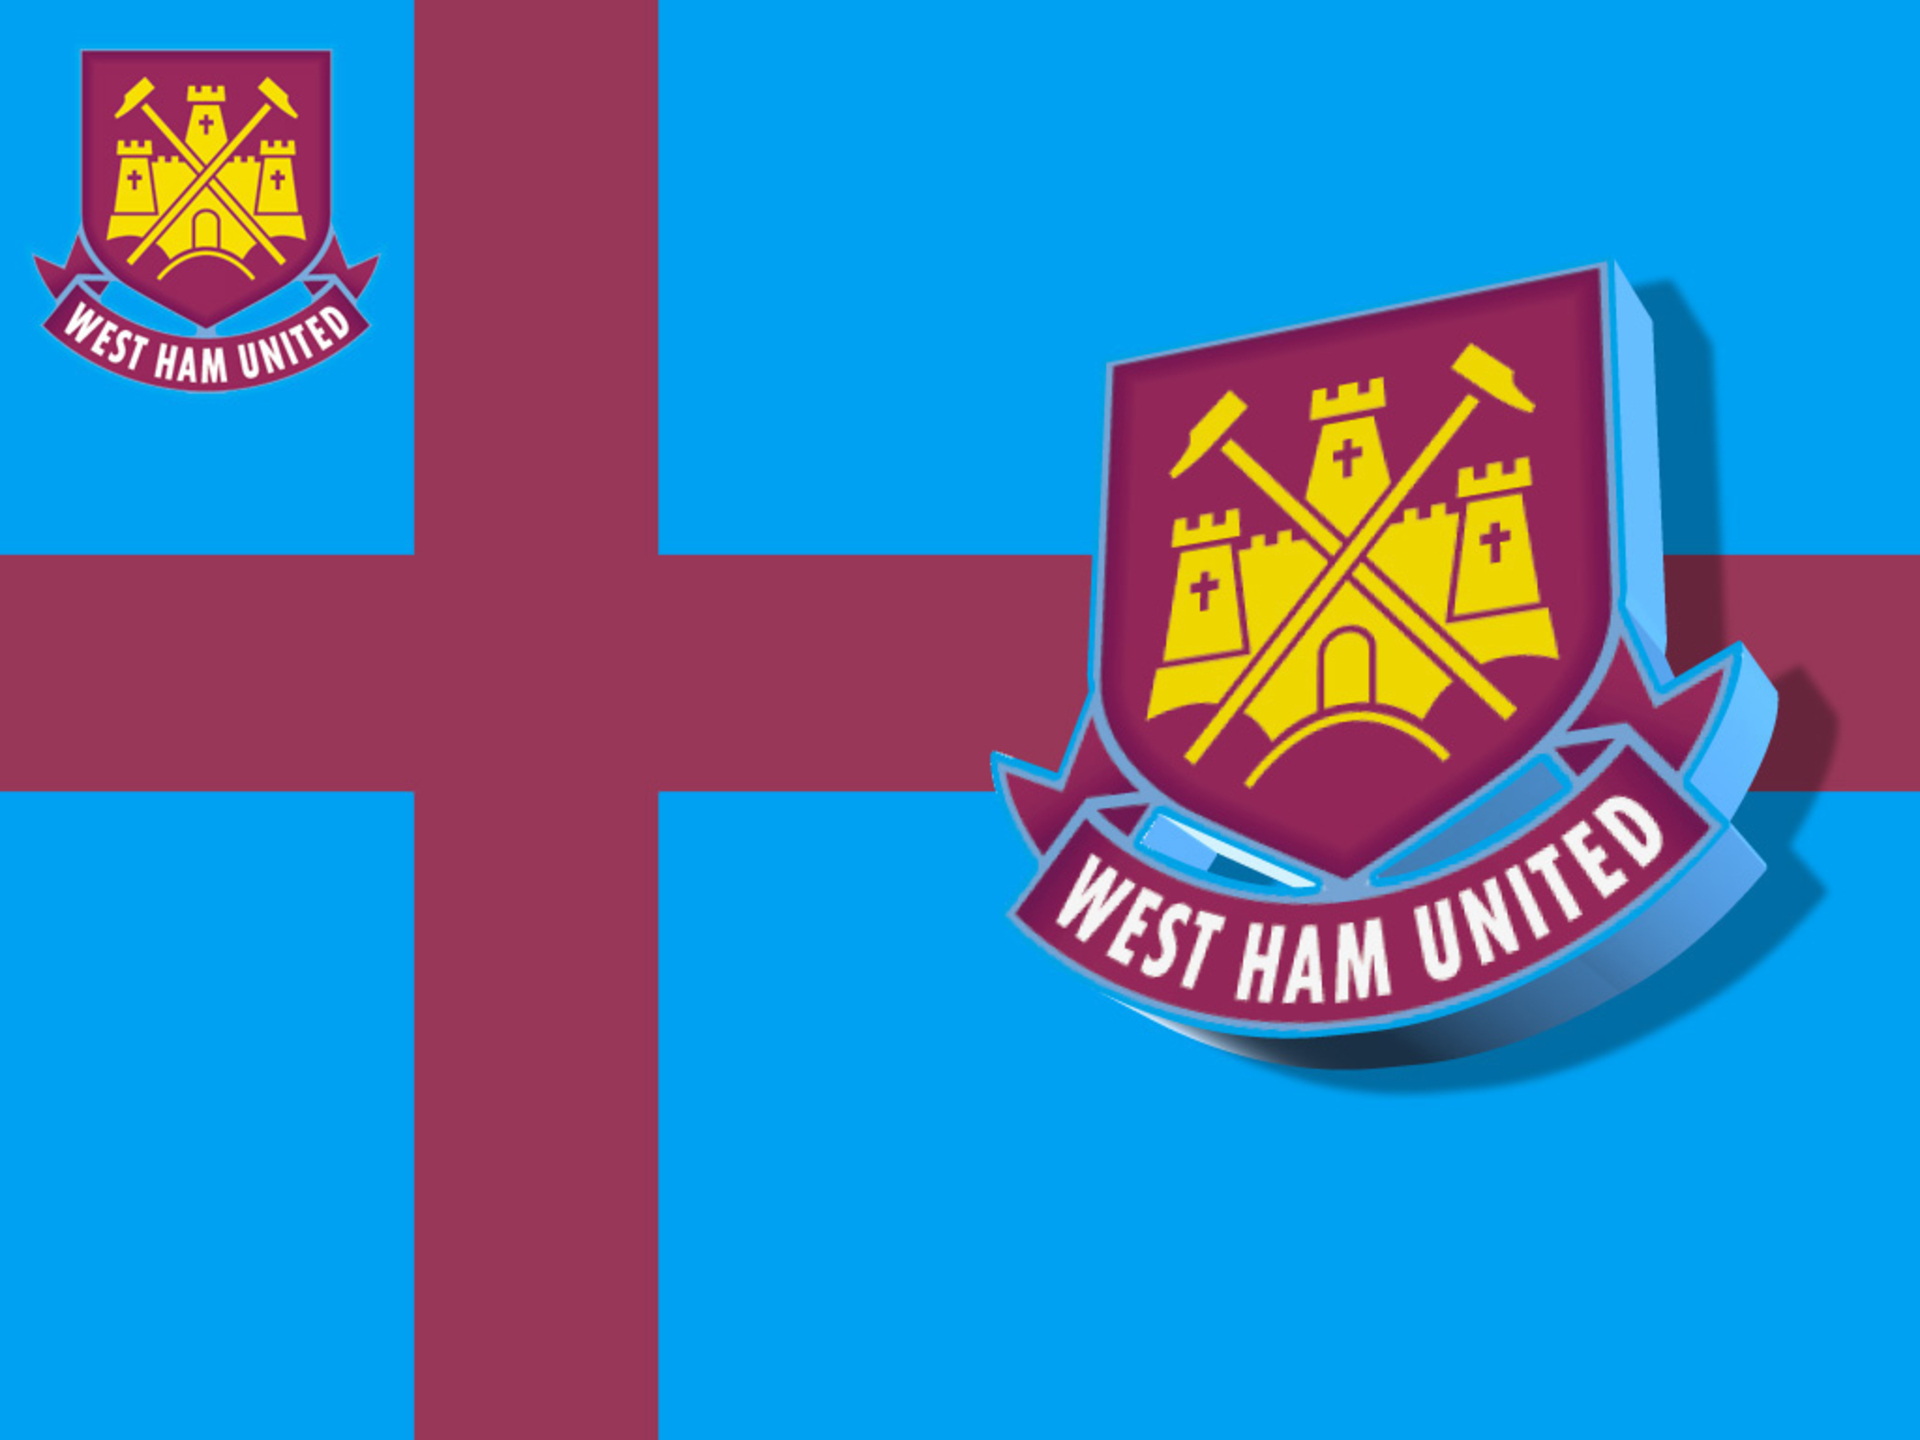 Famous West Ham united wallpapers and images - wallpapers, pictures, photos